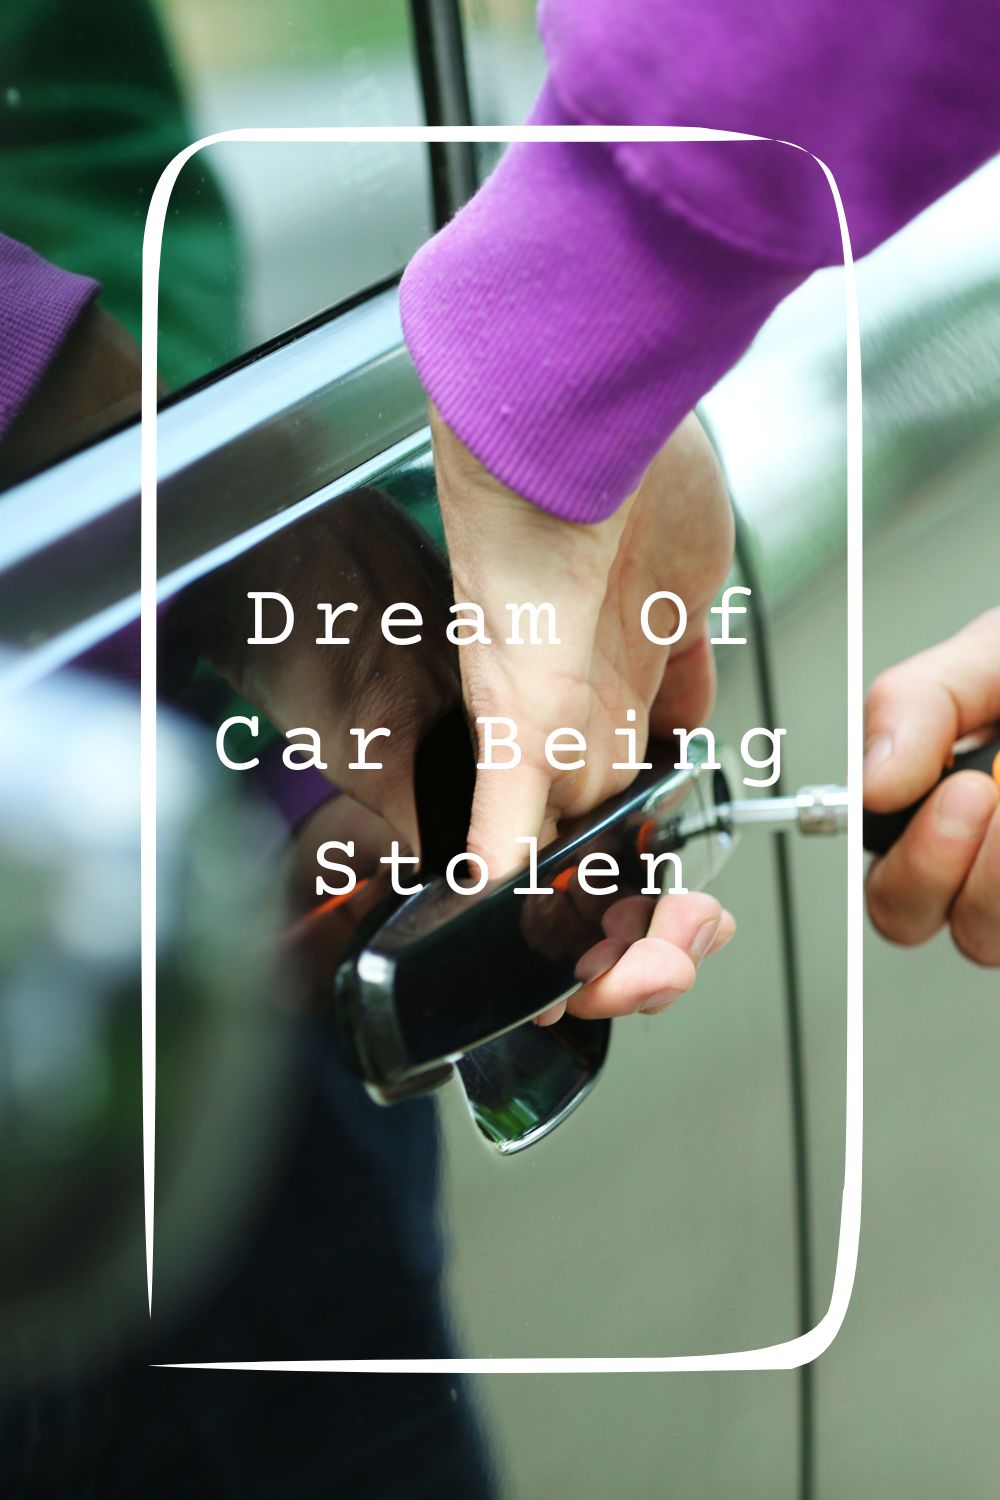 Dream Of Car Being Stolen Meanings 2